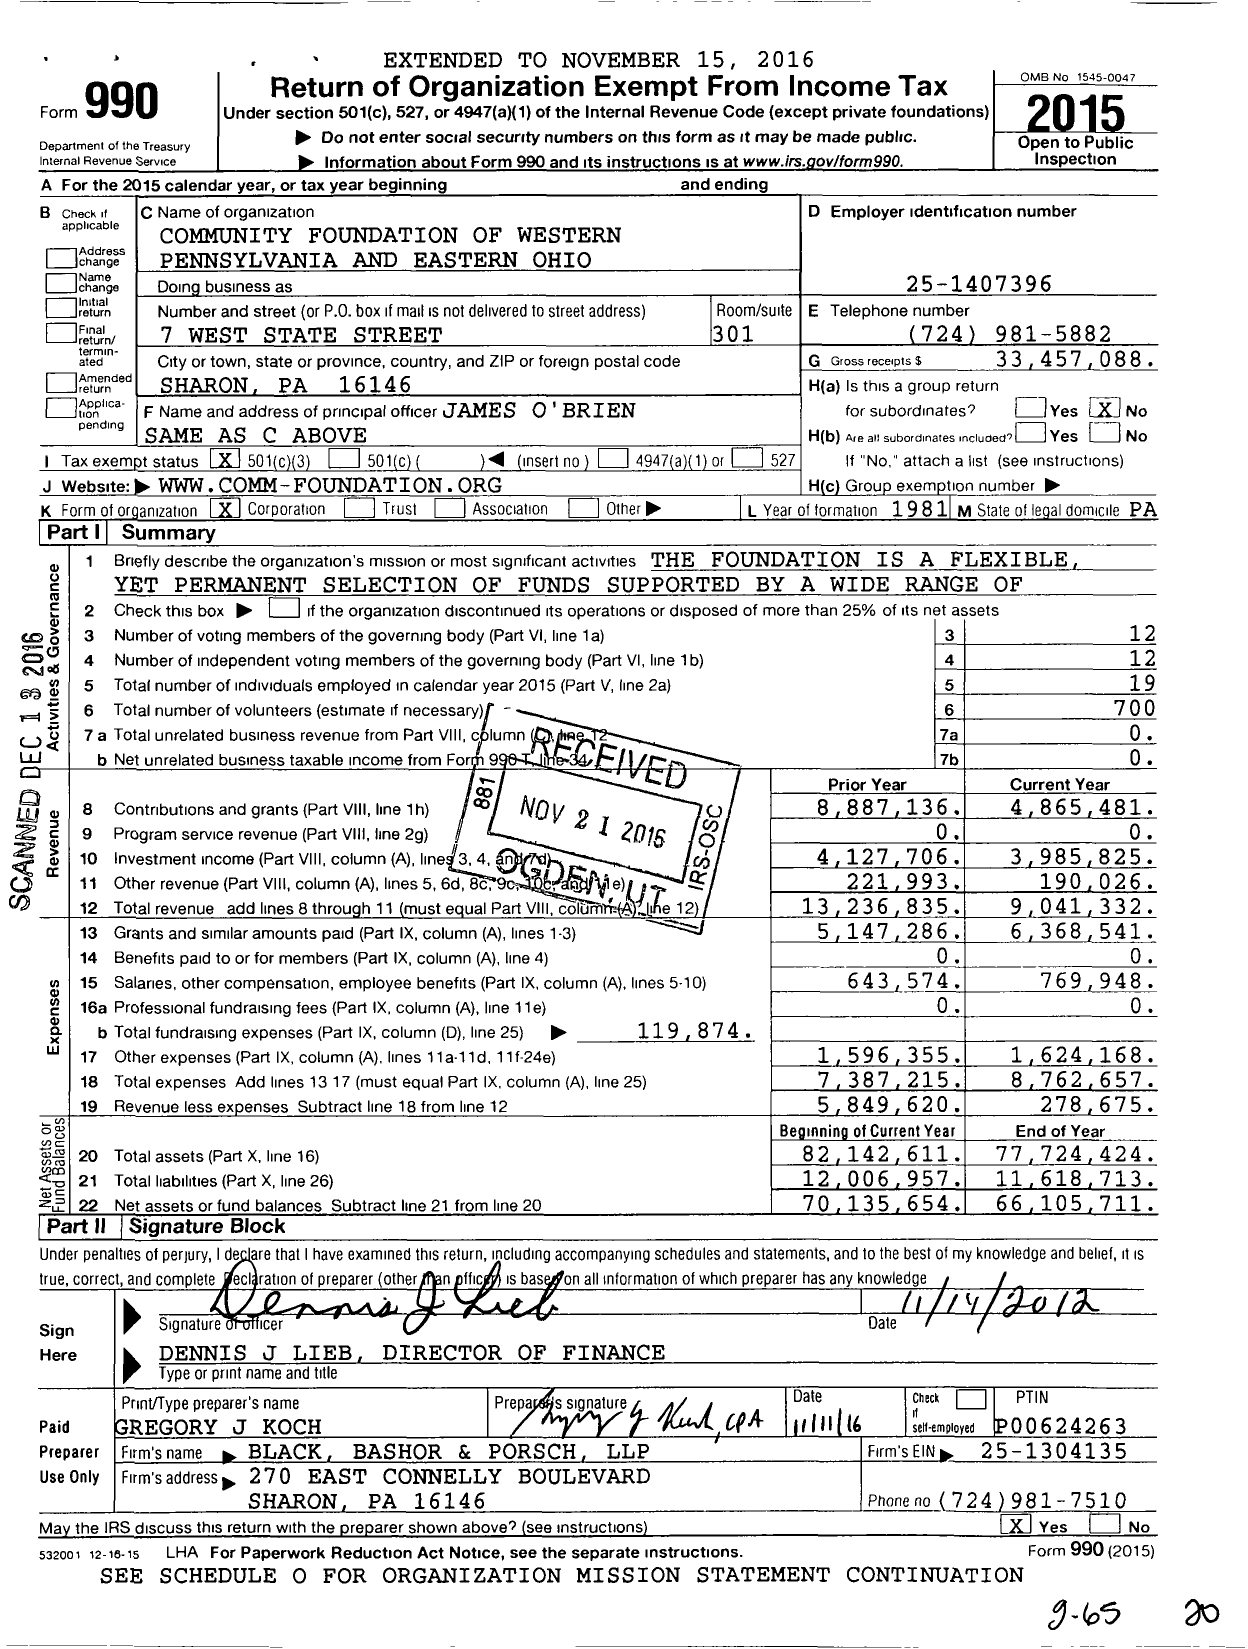 Image of first page of 2015 Form 990 for Community Foundation of Western Pennsylvania and Eastern Ohio